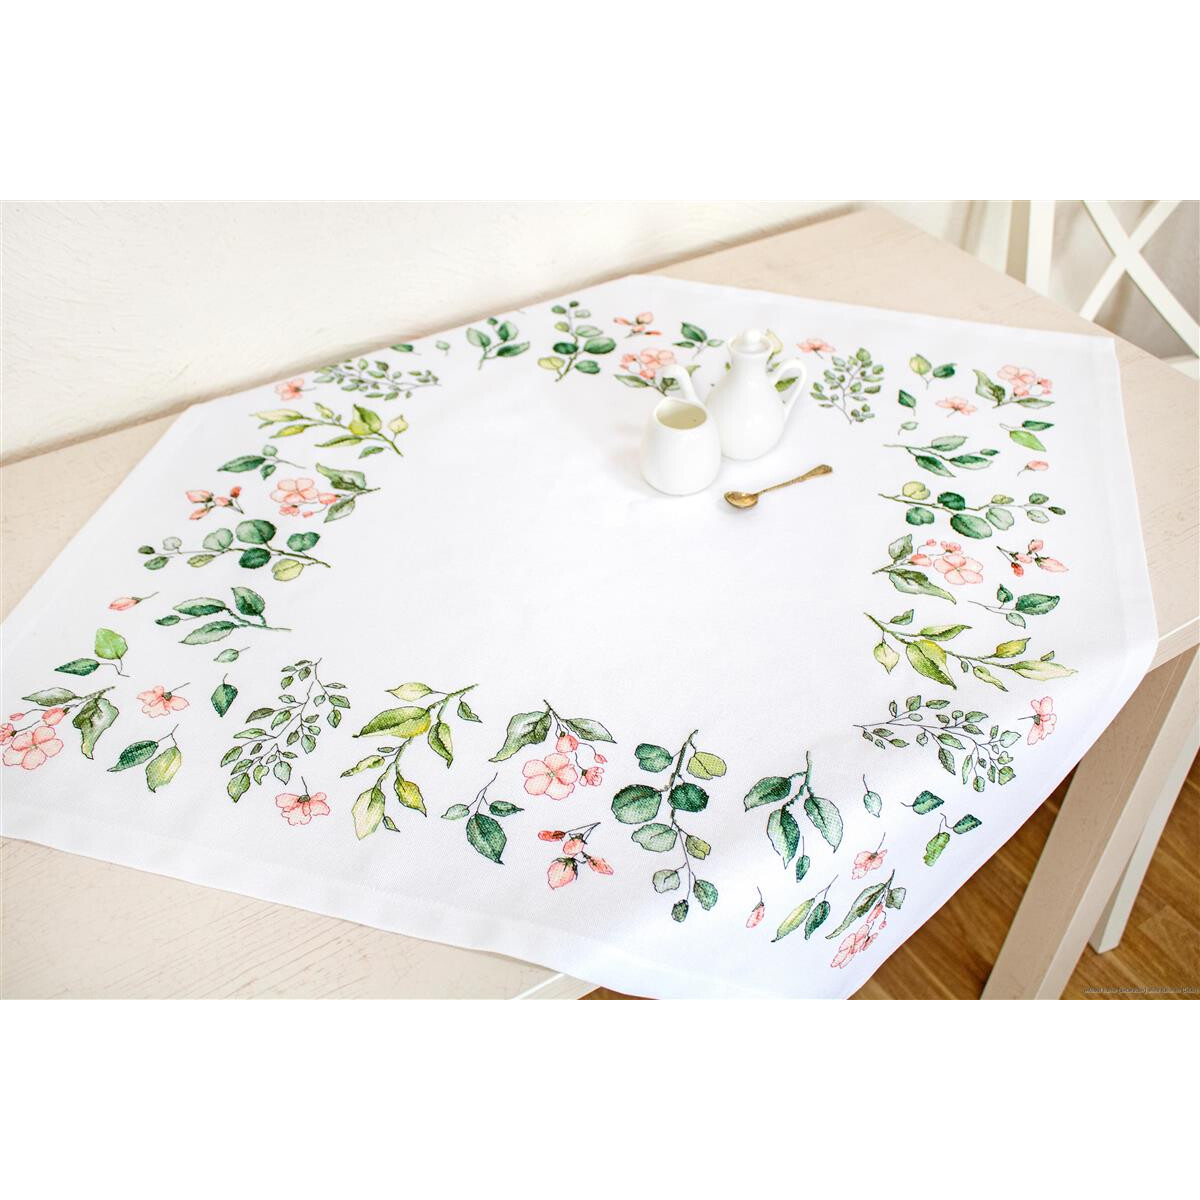 A white tablecloth with floral and leaf patterns on the...